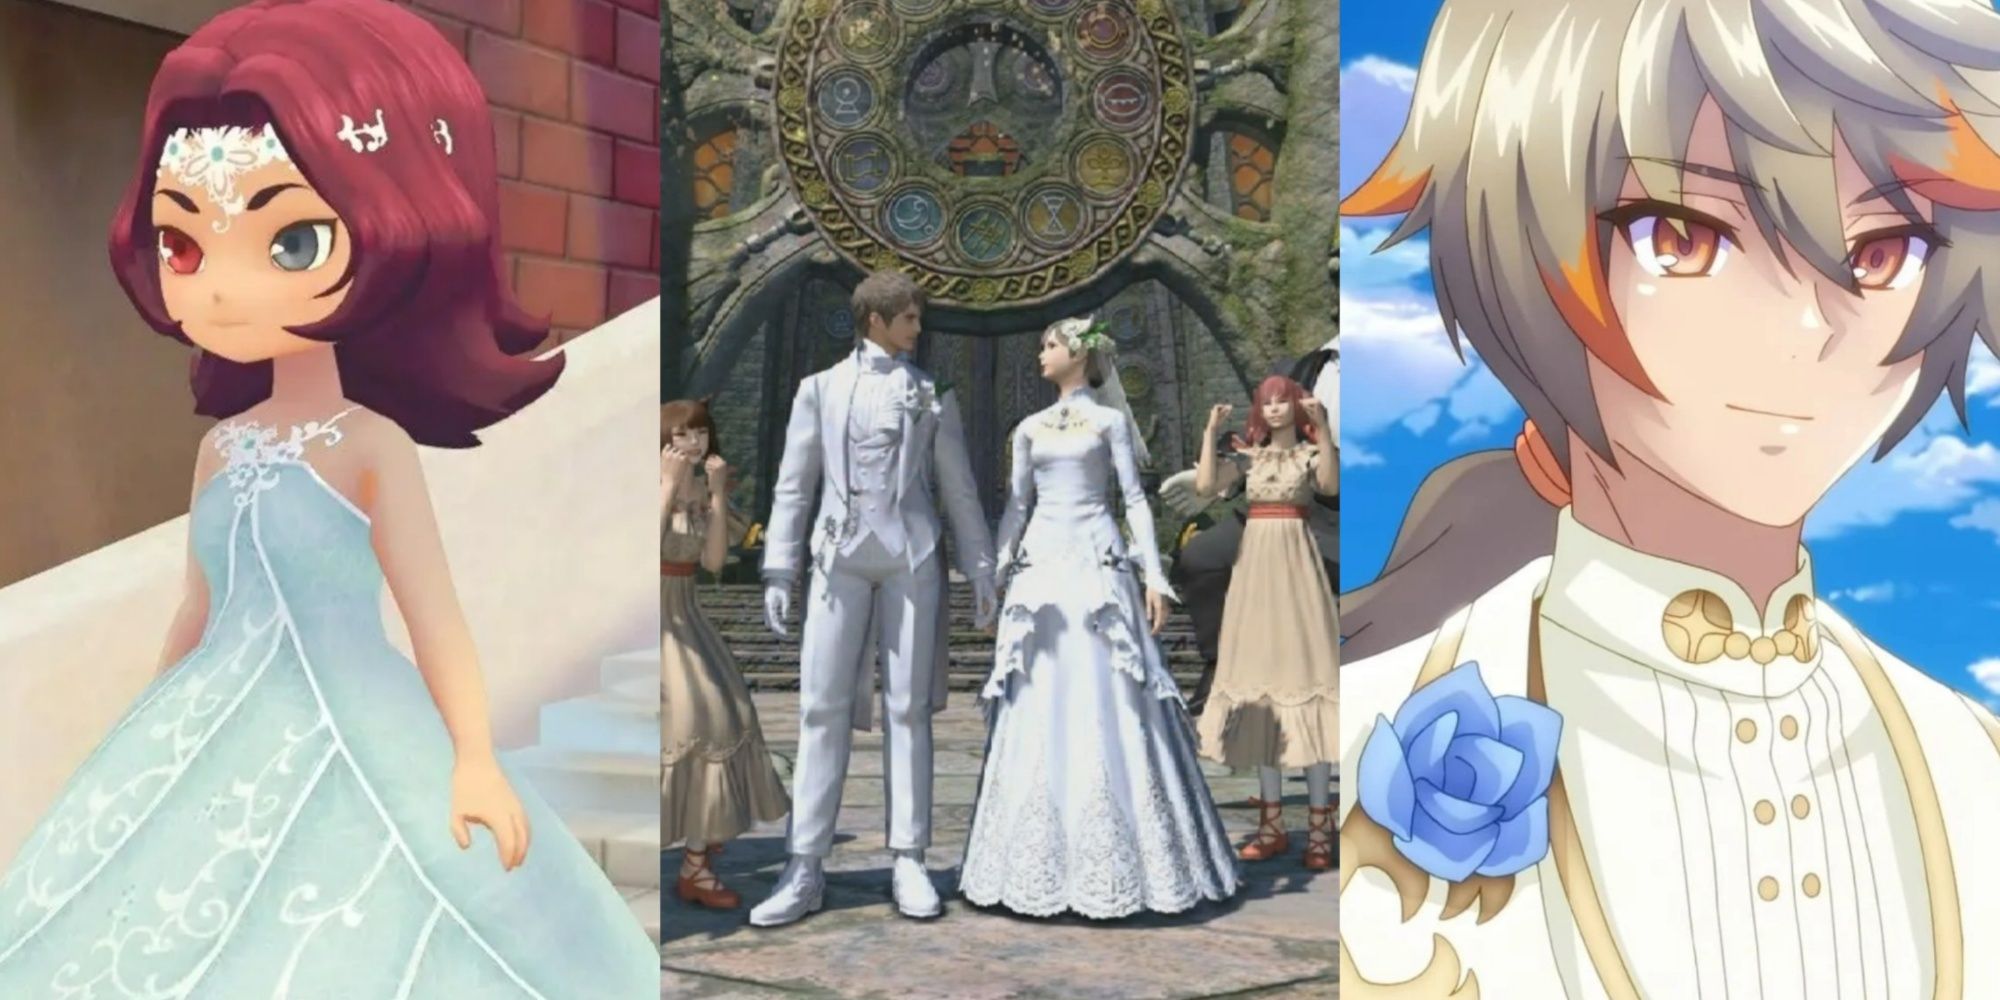 Characters from Story of Seasons, Final Fantasy 14, and Rune Factory 5 in their weddings